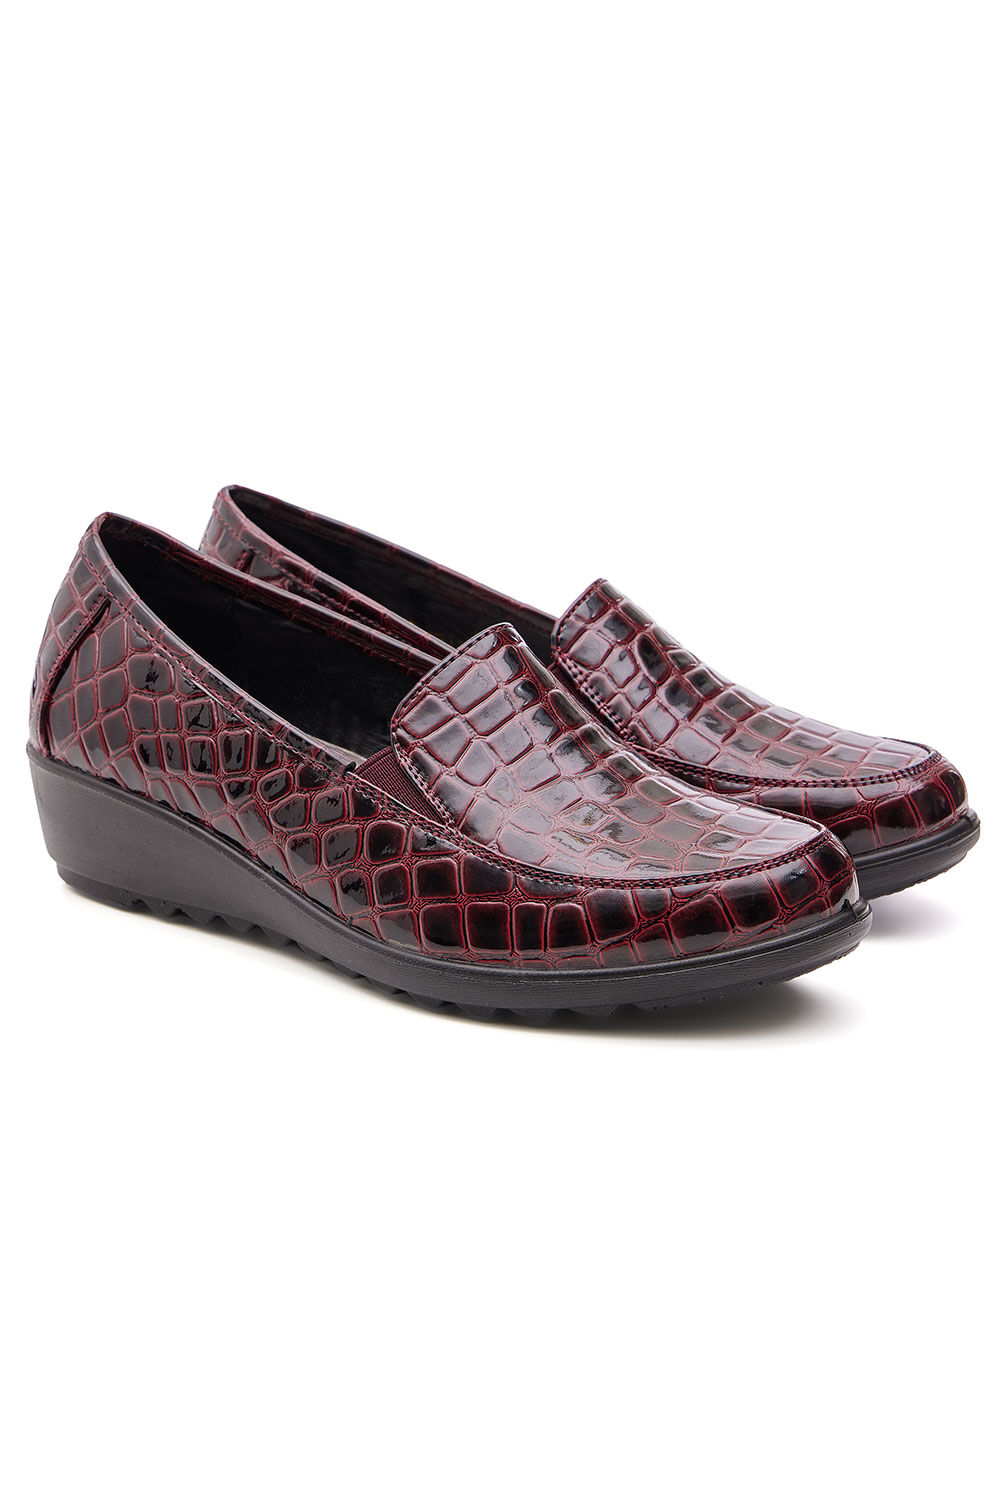 Cushion Walk Red - Faux Snake Patent Slip On Shoes (Wide Fit), Size: 3